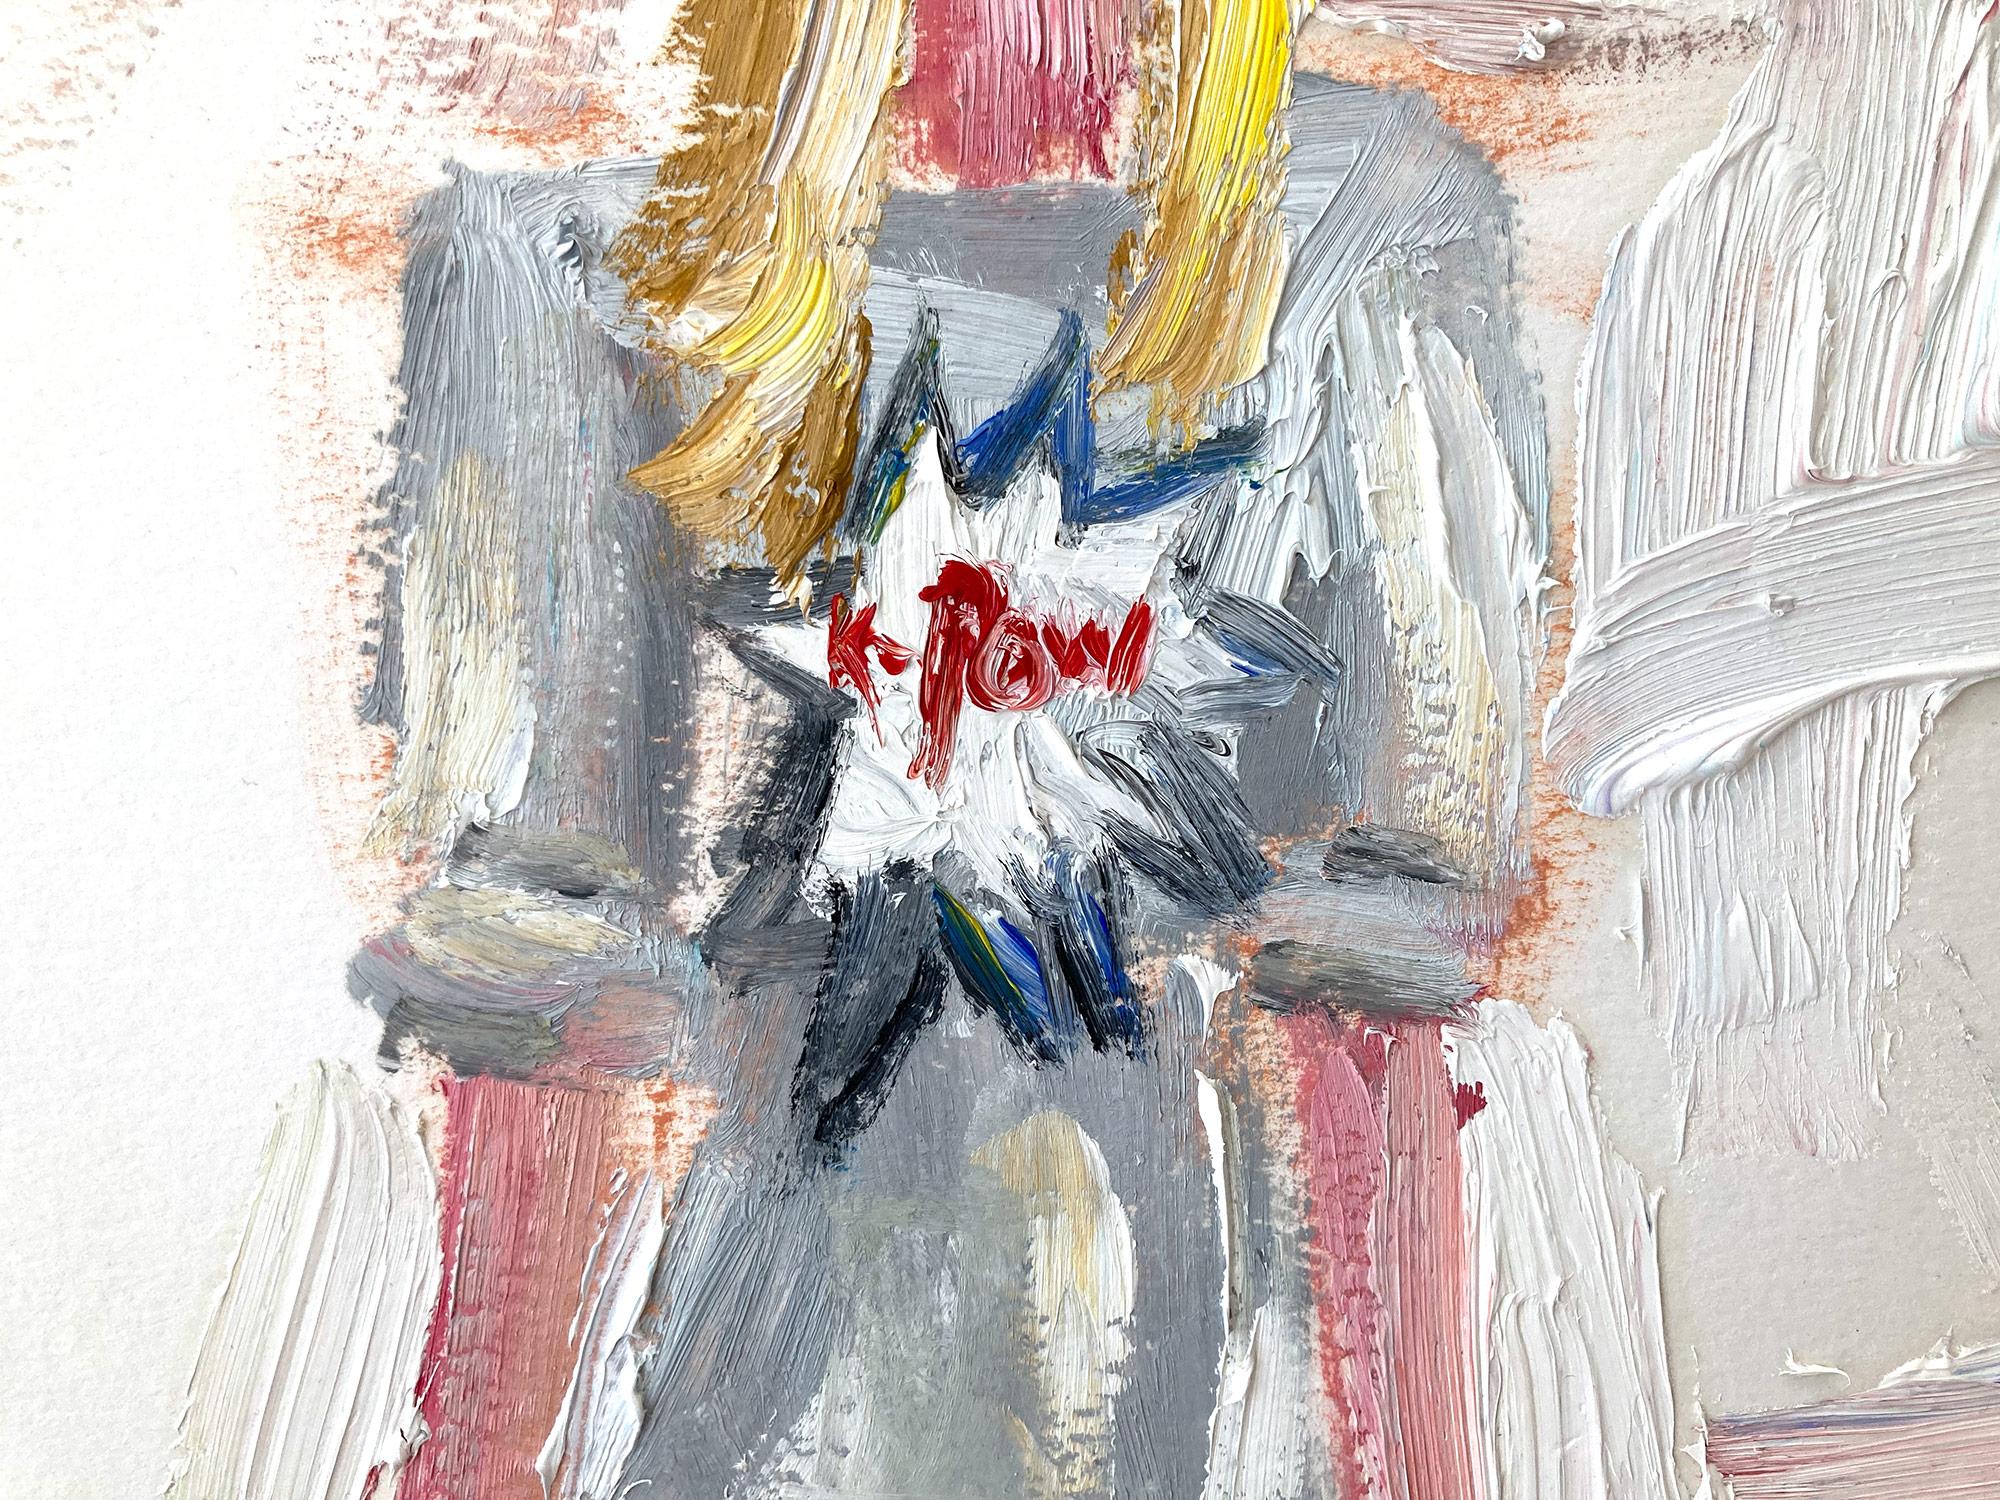 This piece depicts fashion mogul Chiara Ferragni with bold brush work and strong lines. Exploring the purity of the feminine form and the drama of French haute couture, artist Cindy Shaoul creates a dialogue between the figurative and the abstract.